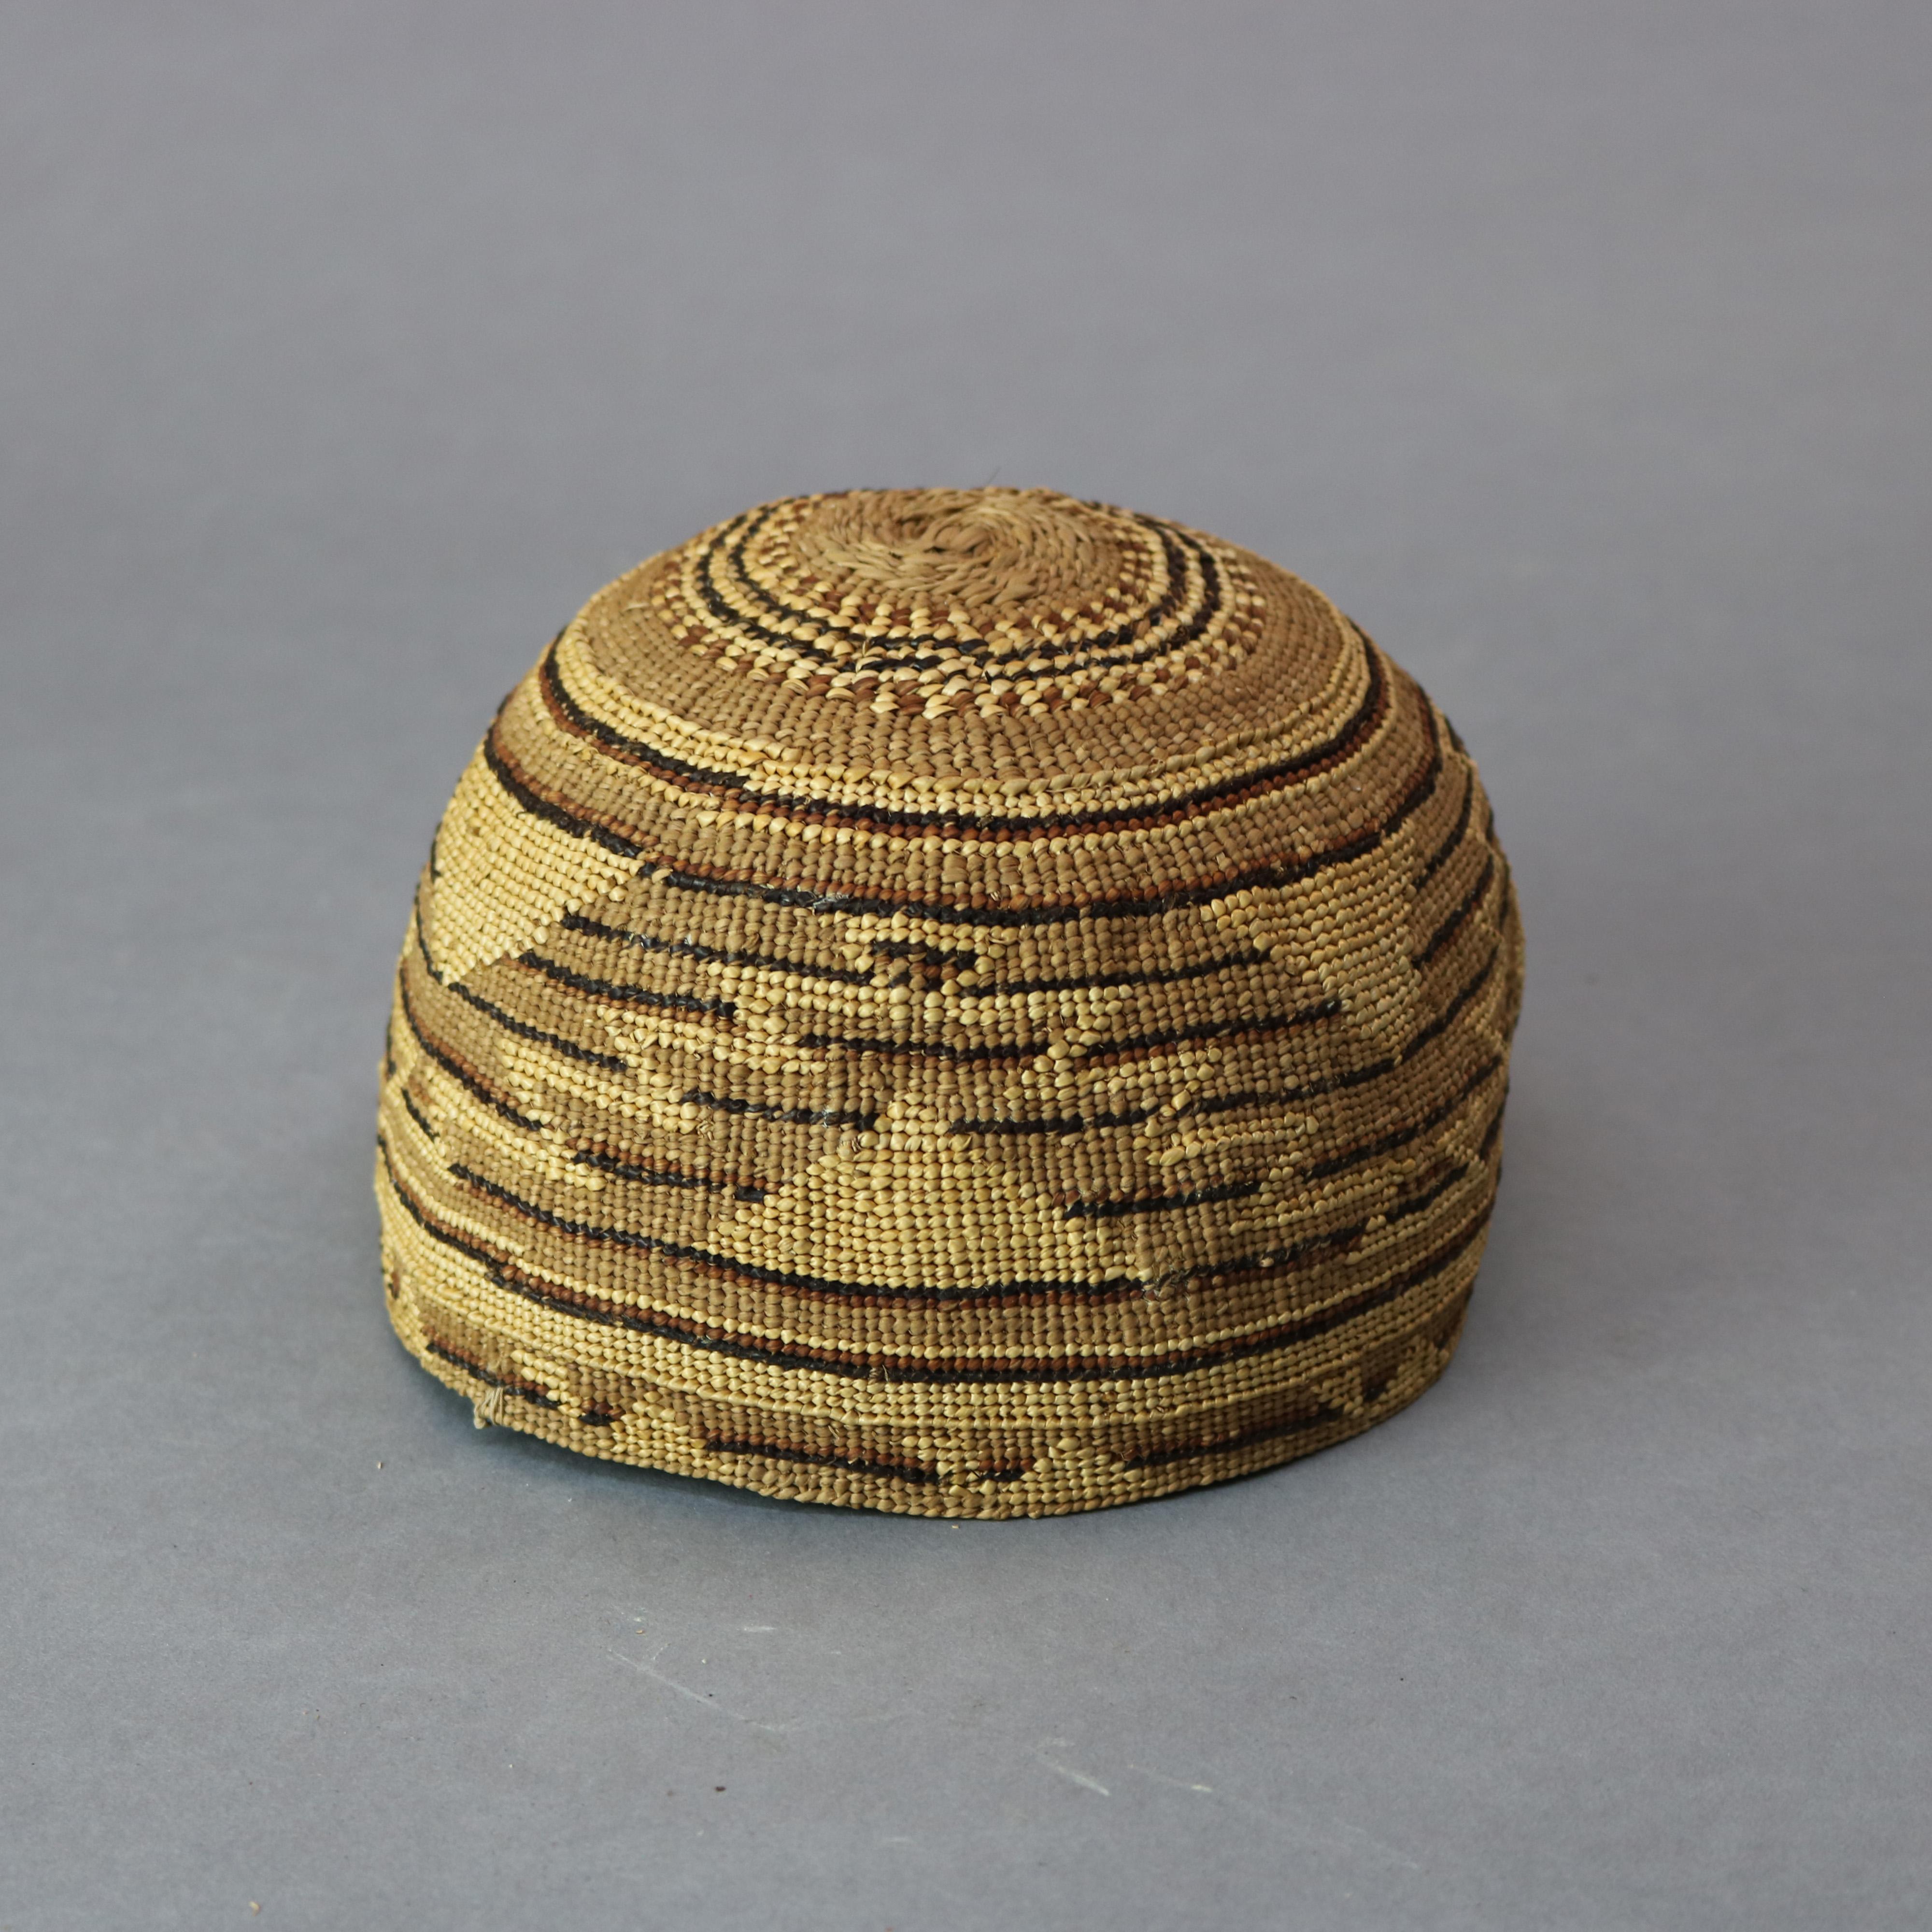 An antique Southwest Native American Indian Pima basket offers handwoven geometric and serrated design, circa 1920

Measures: 4